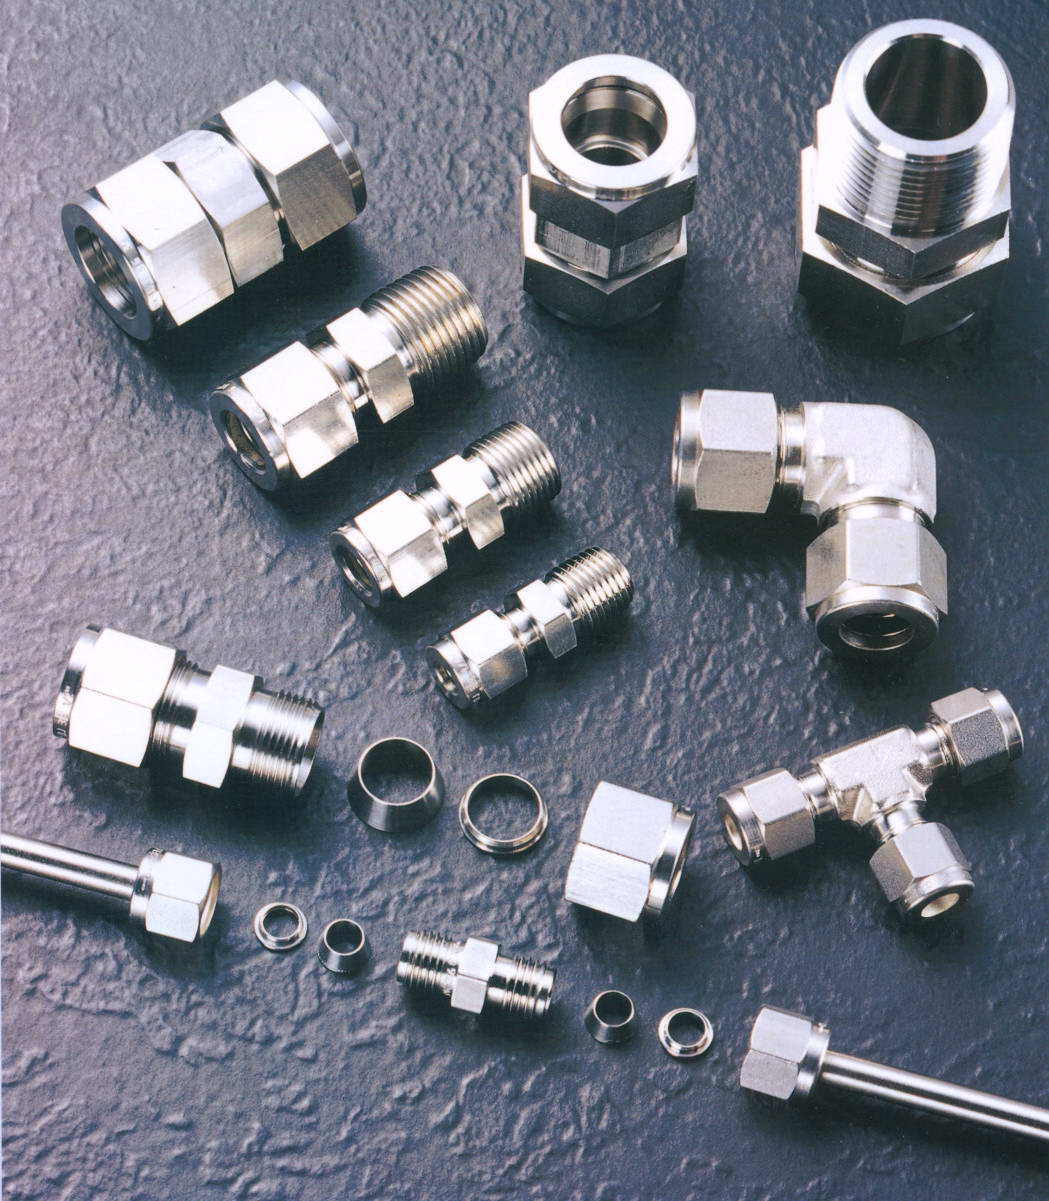 VCR 管件, VCR接头, VCR阀门, 气体管件 ( VCR Fittings / VCR Couplings Parker / VCR Micro Fittings)